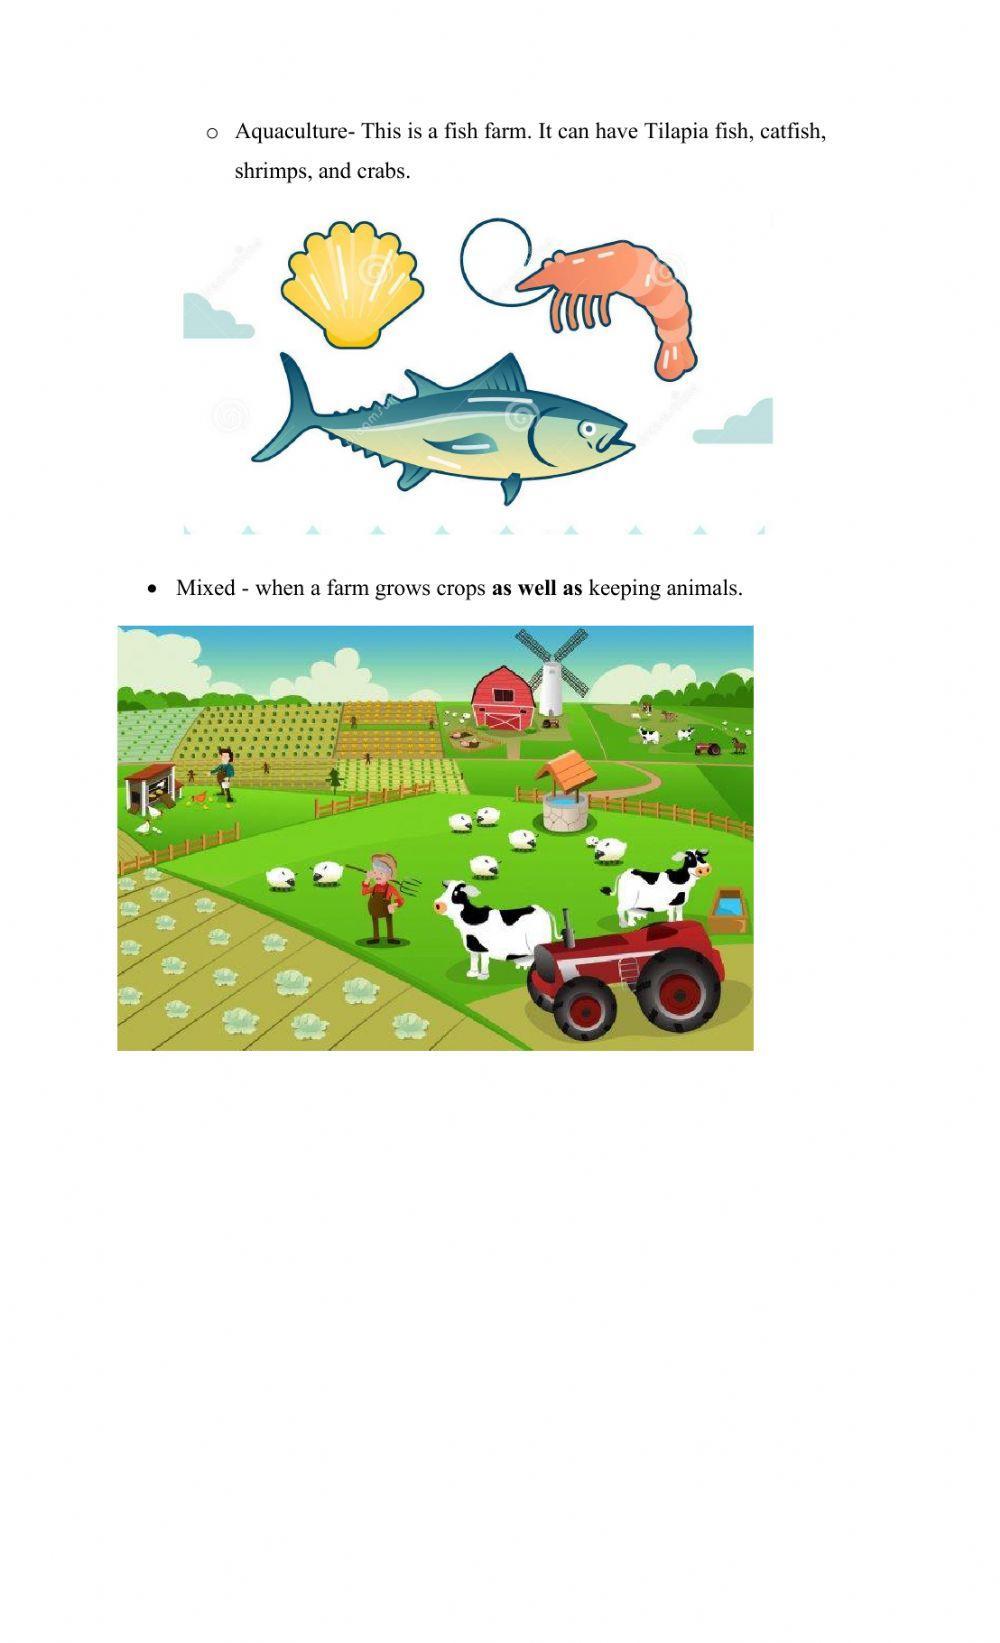 Types of farms